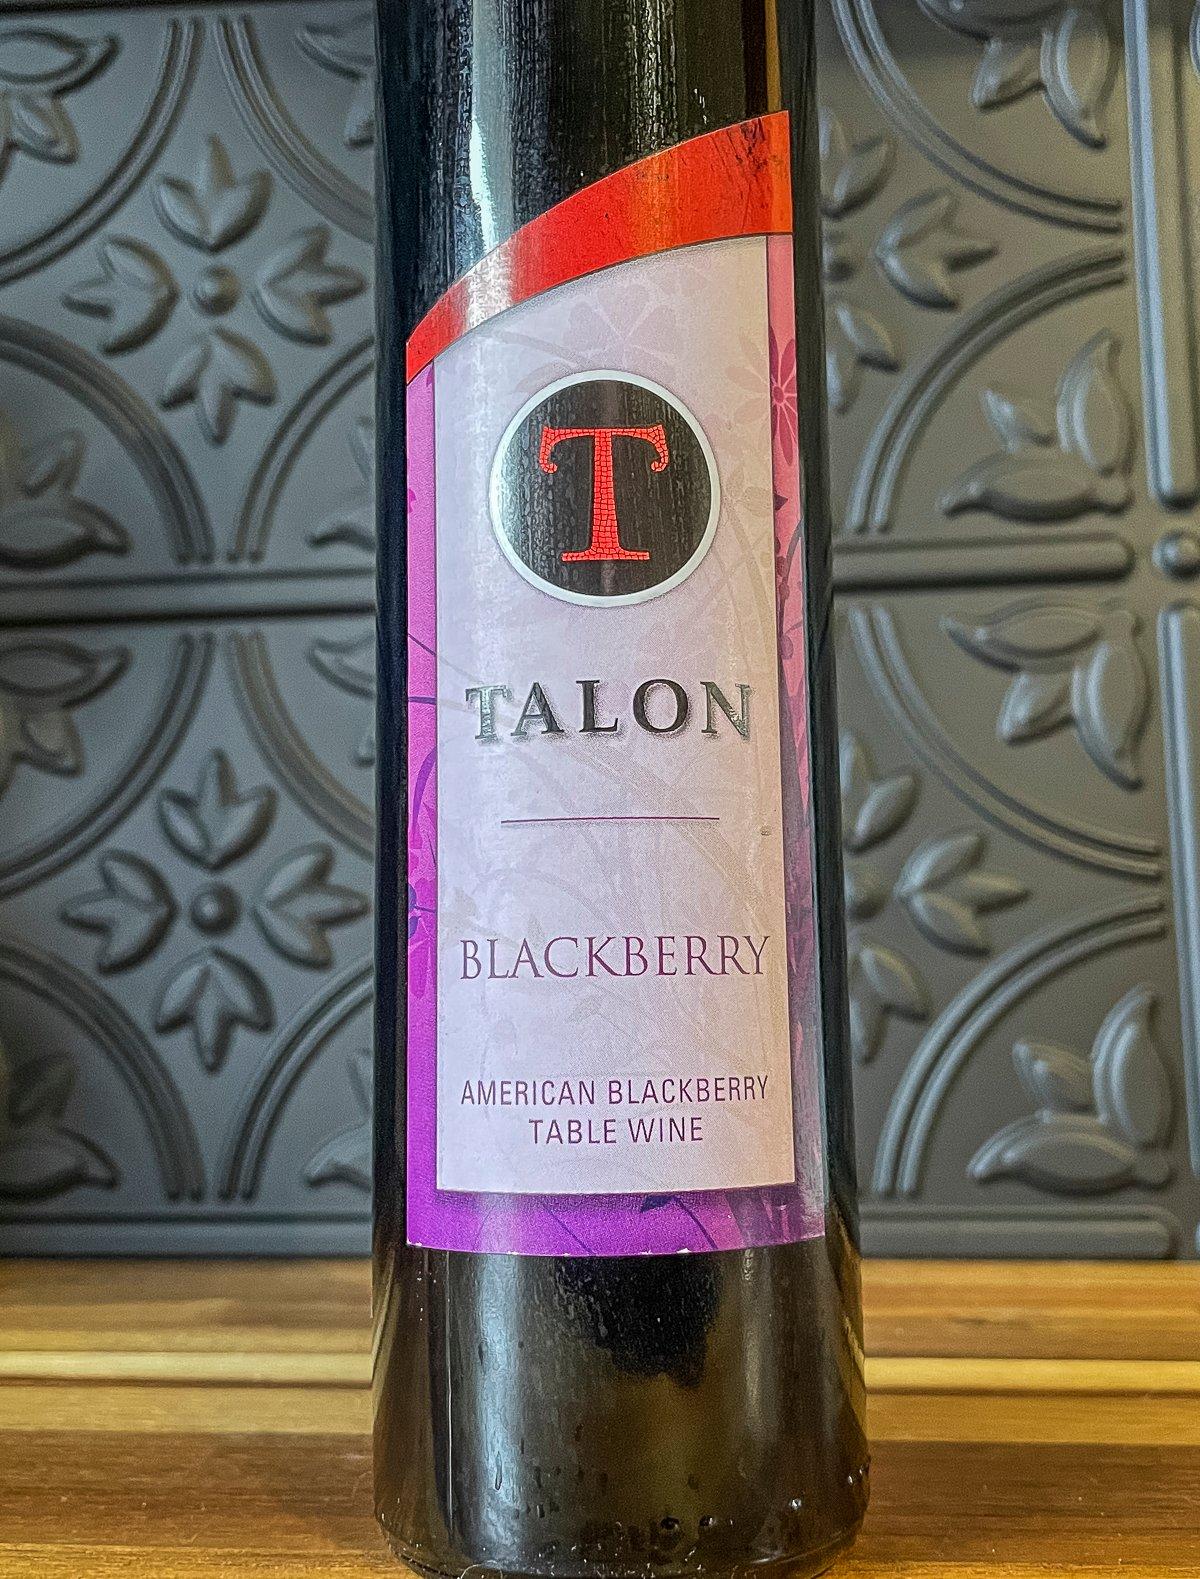 Start the sauce with a nice blackberry wine.